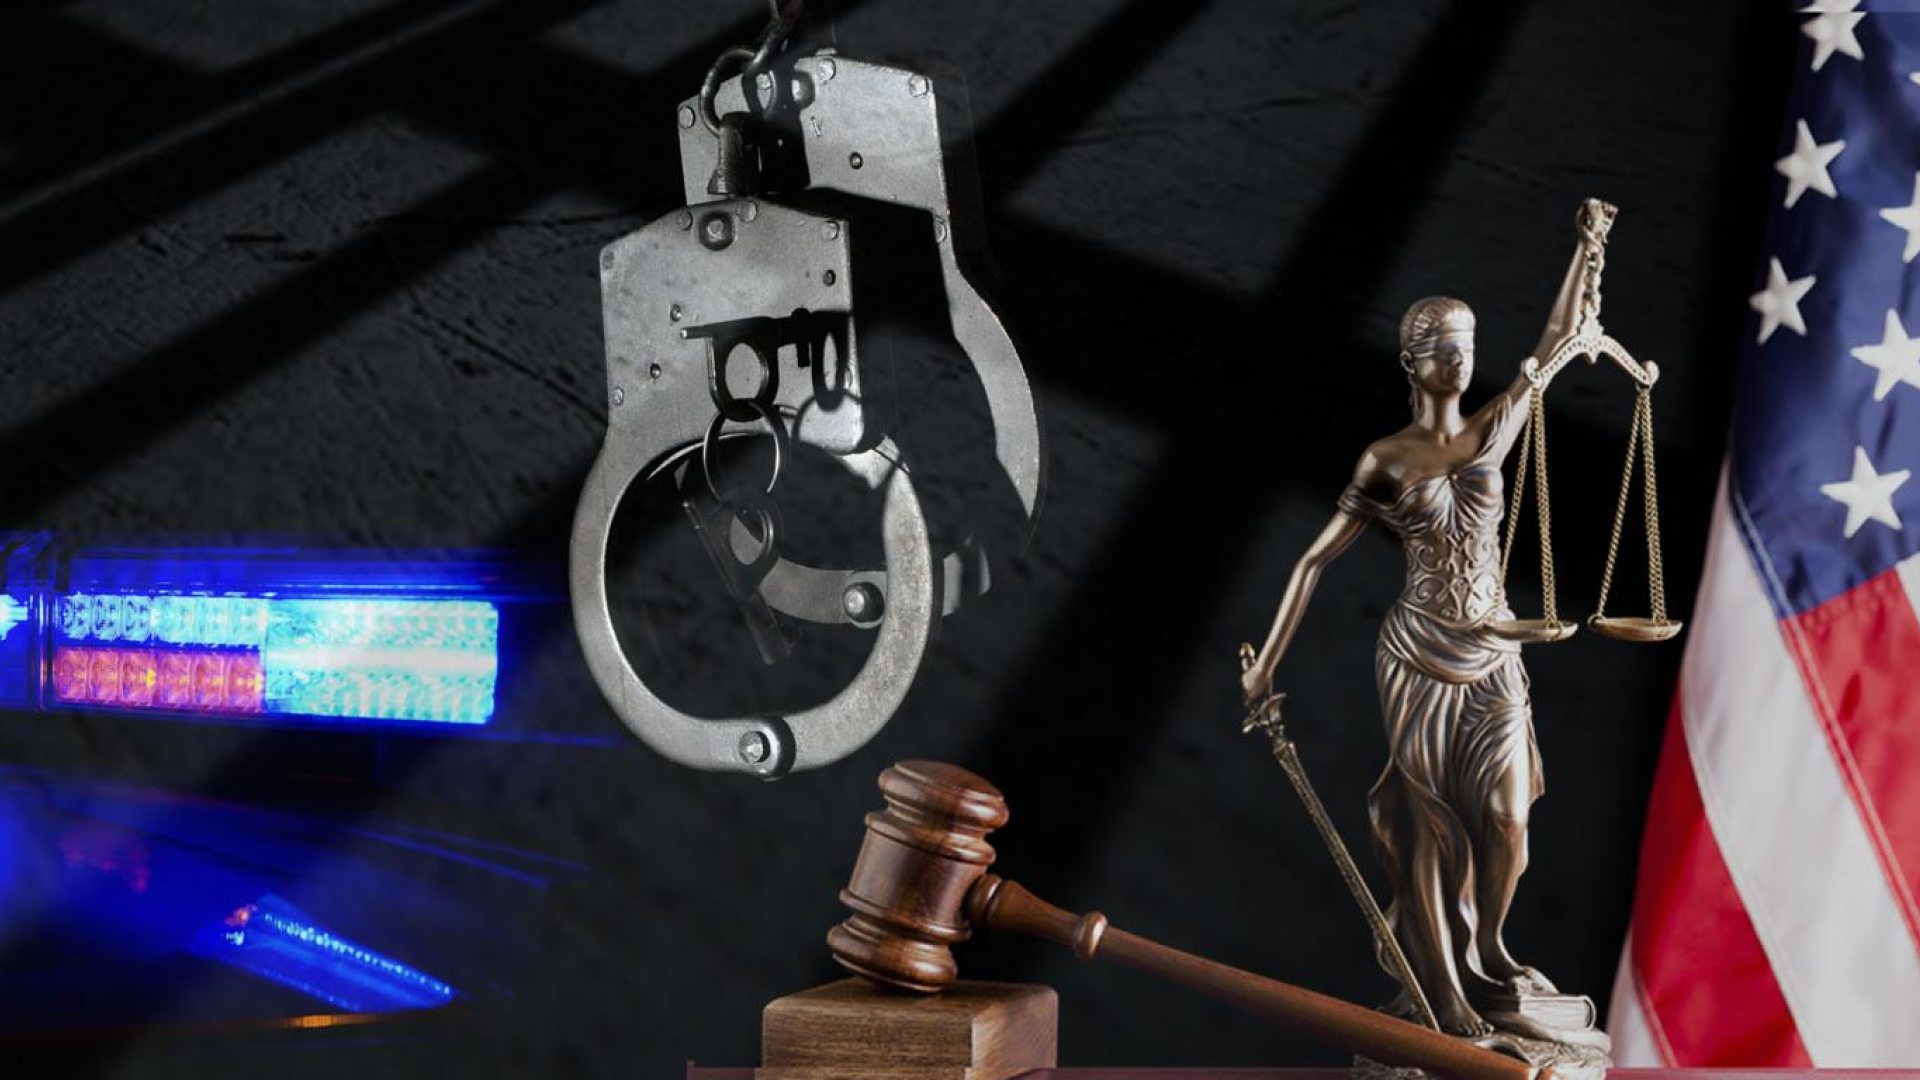 symbols of Criminal Justice: lights on a police car, handcuffs, a gavel, Lady Justice, the American flag